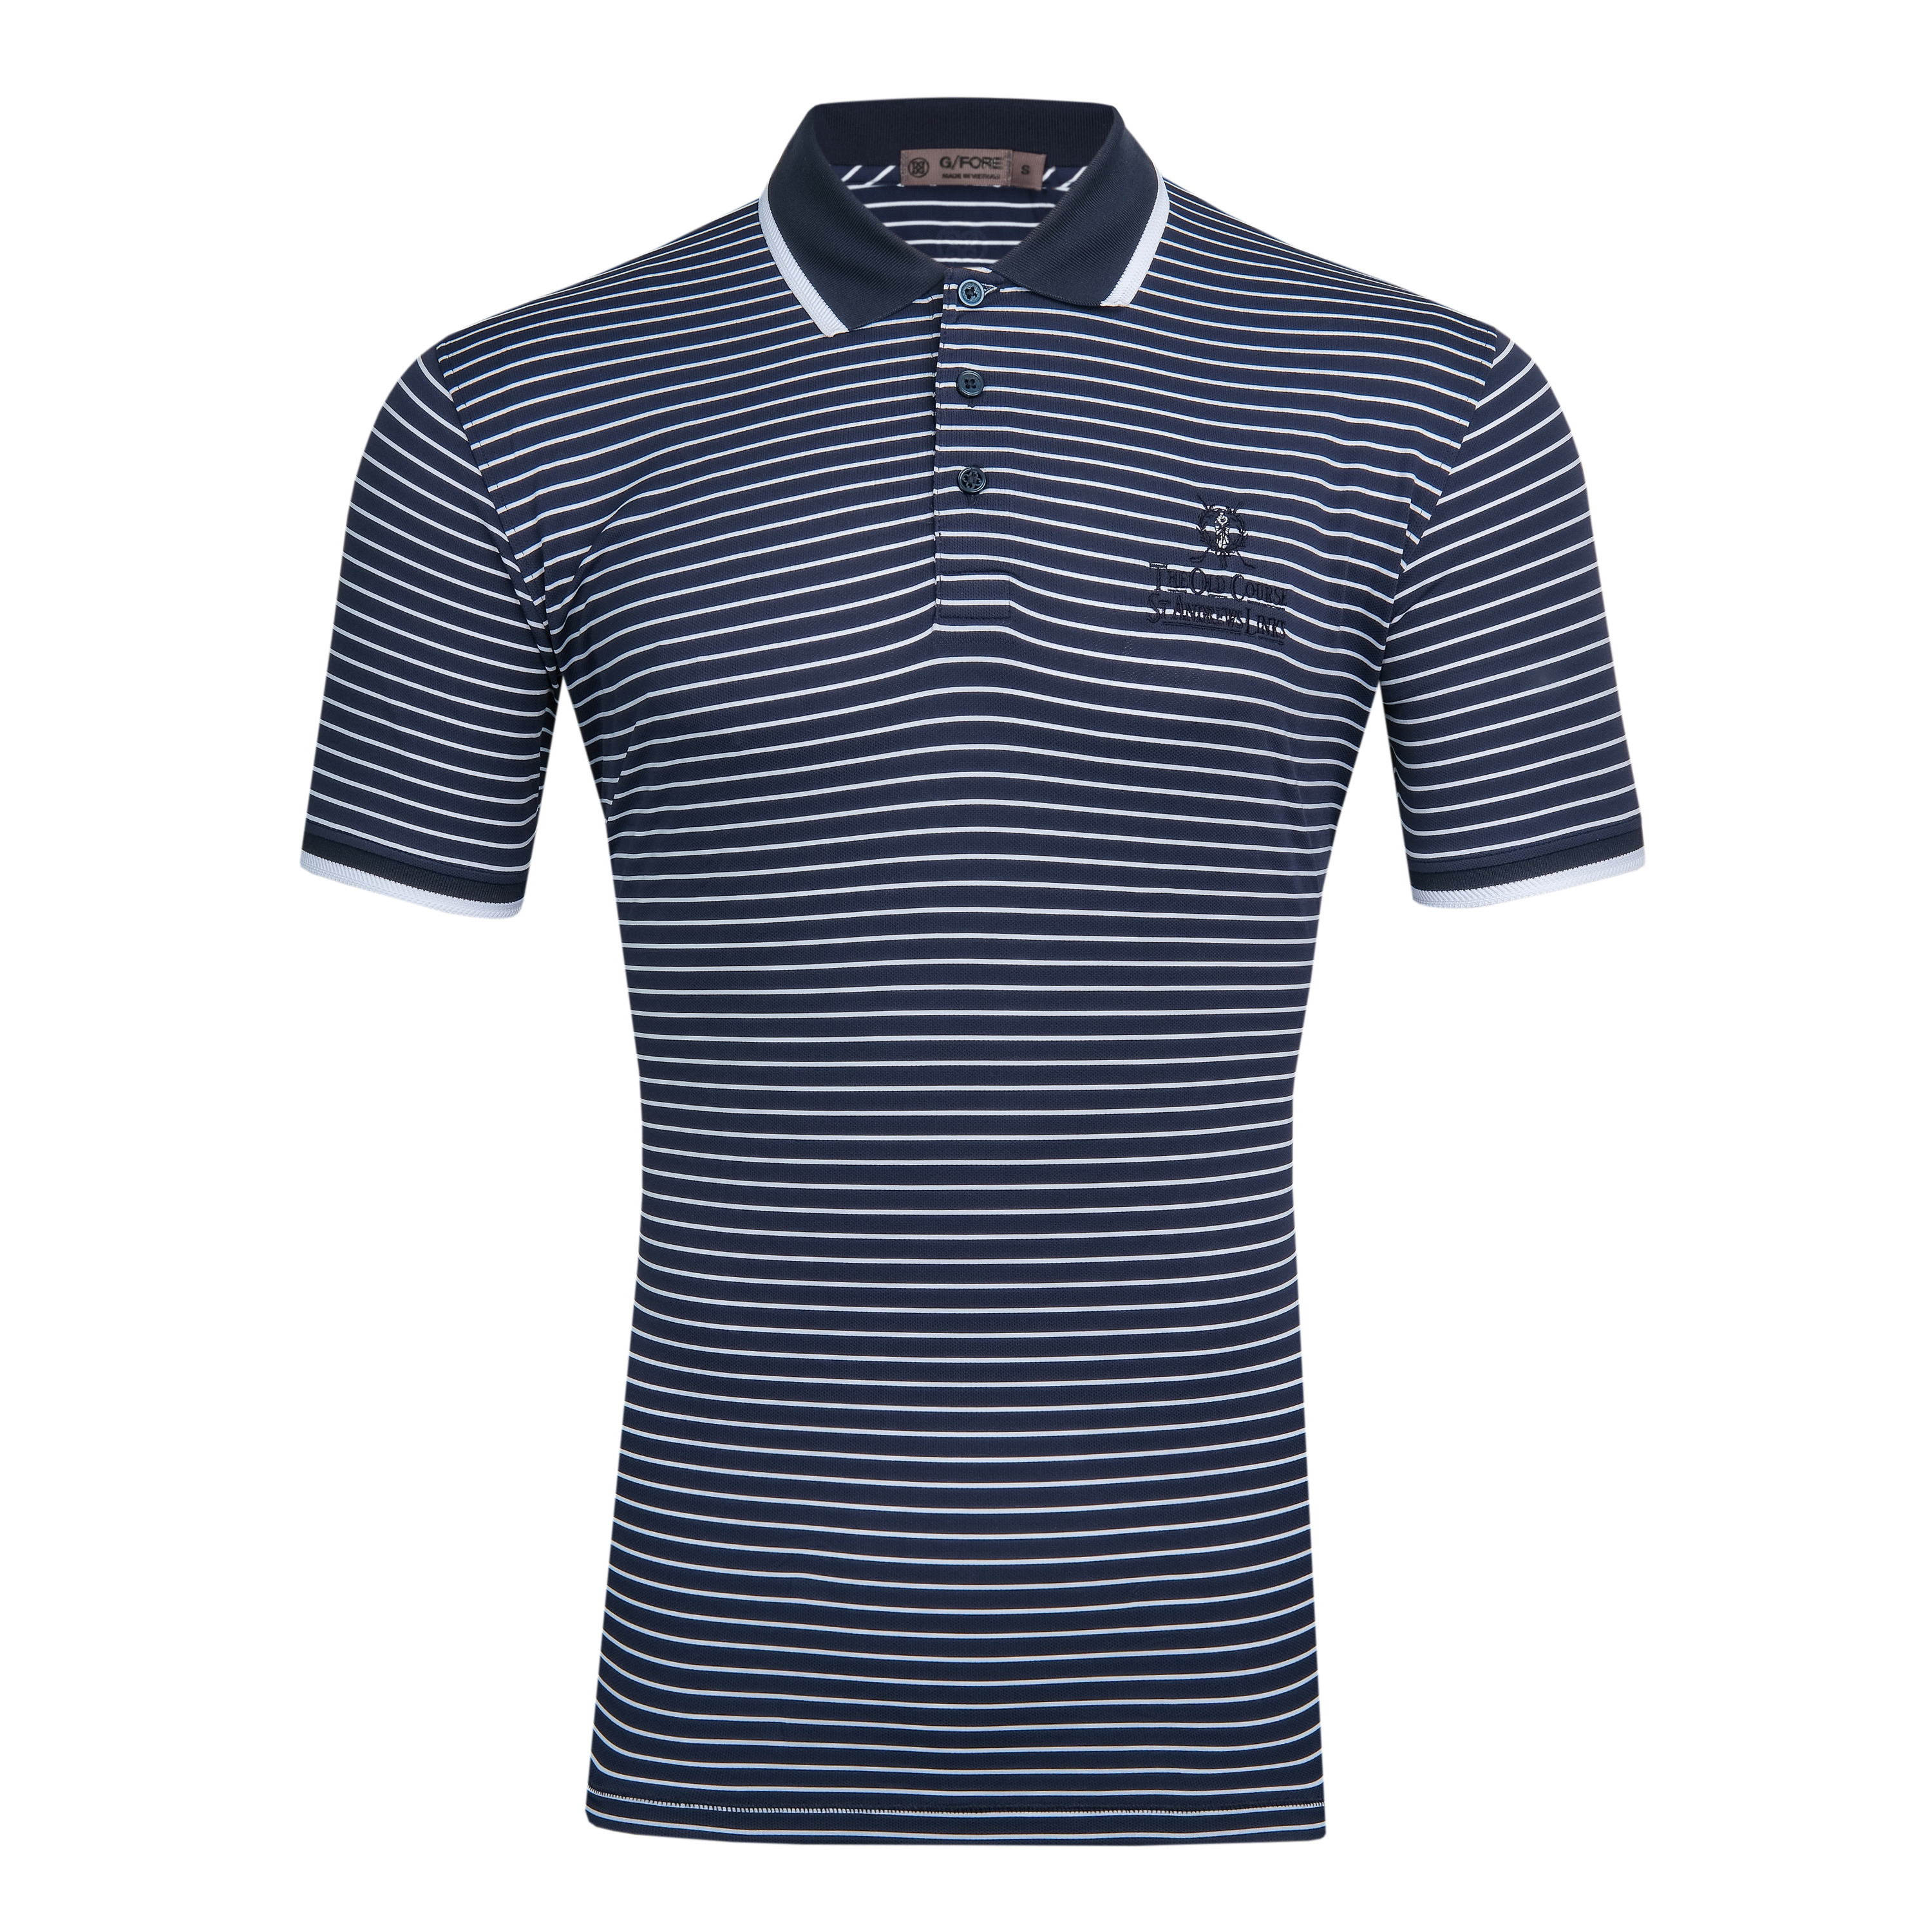 G/fore Perforated Stripe Polo